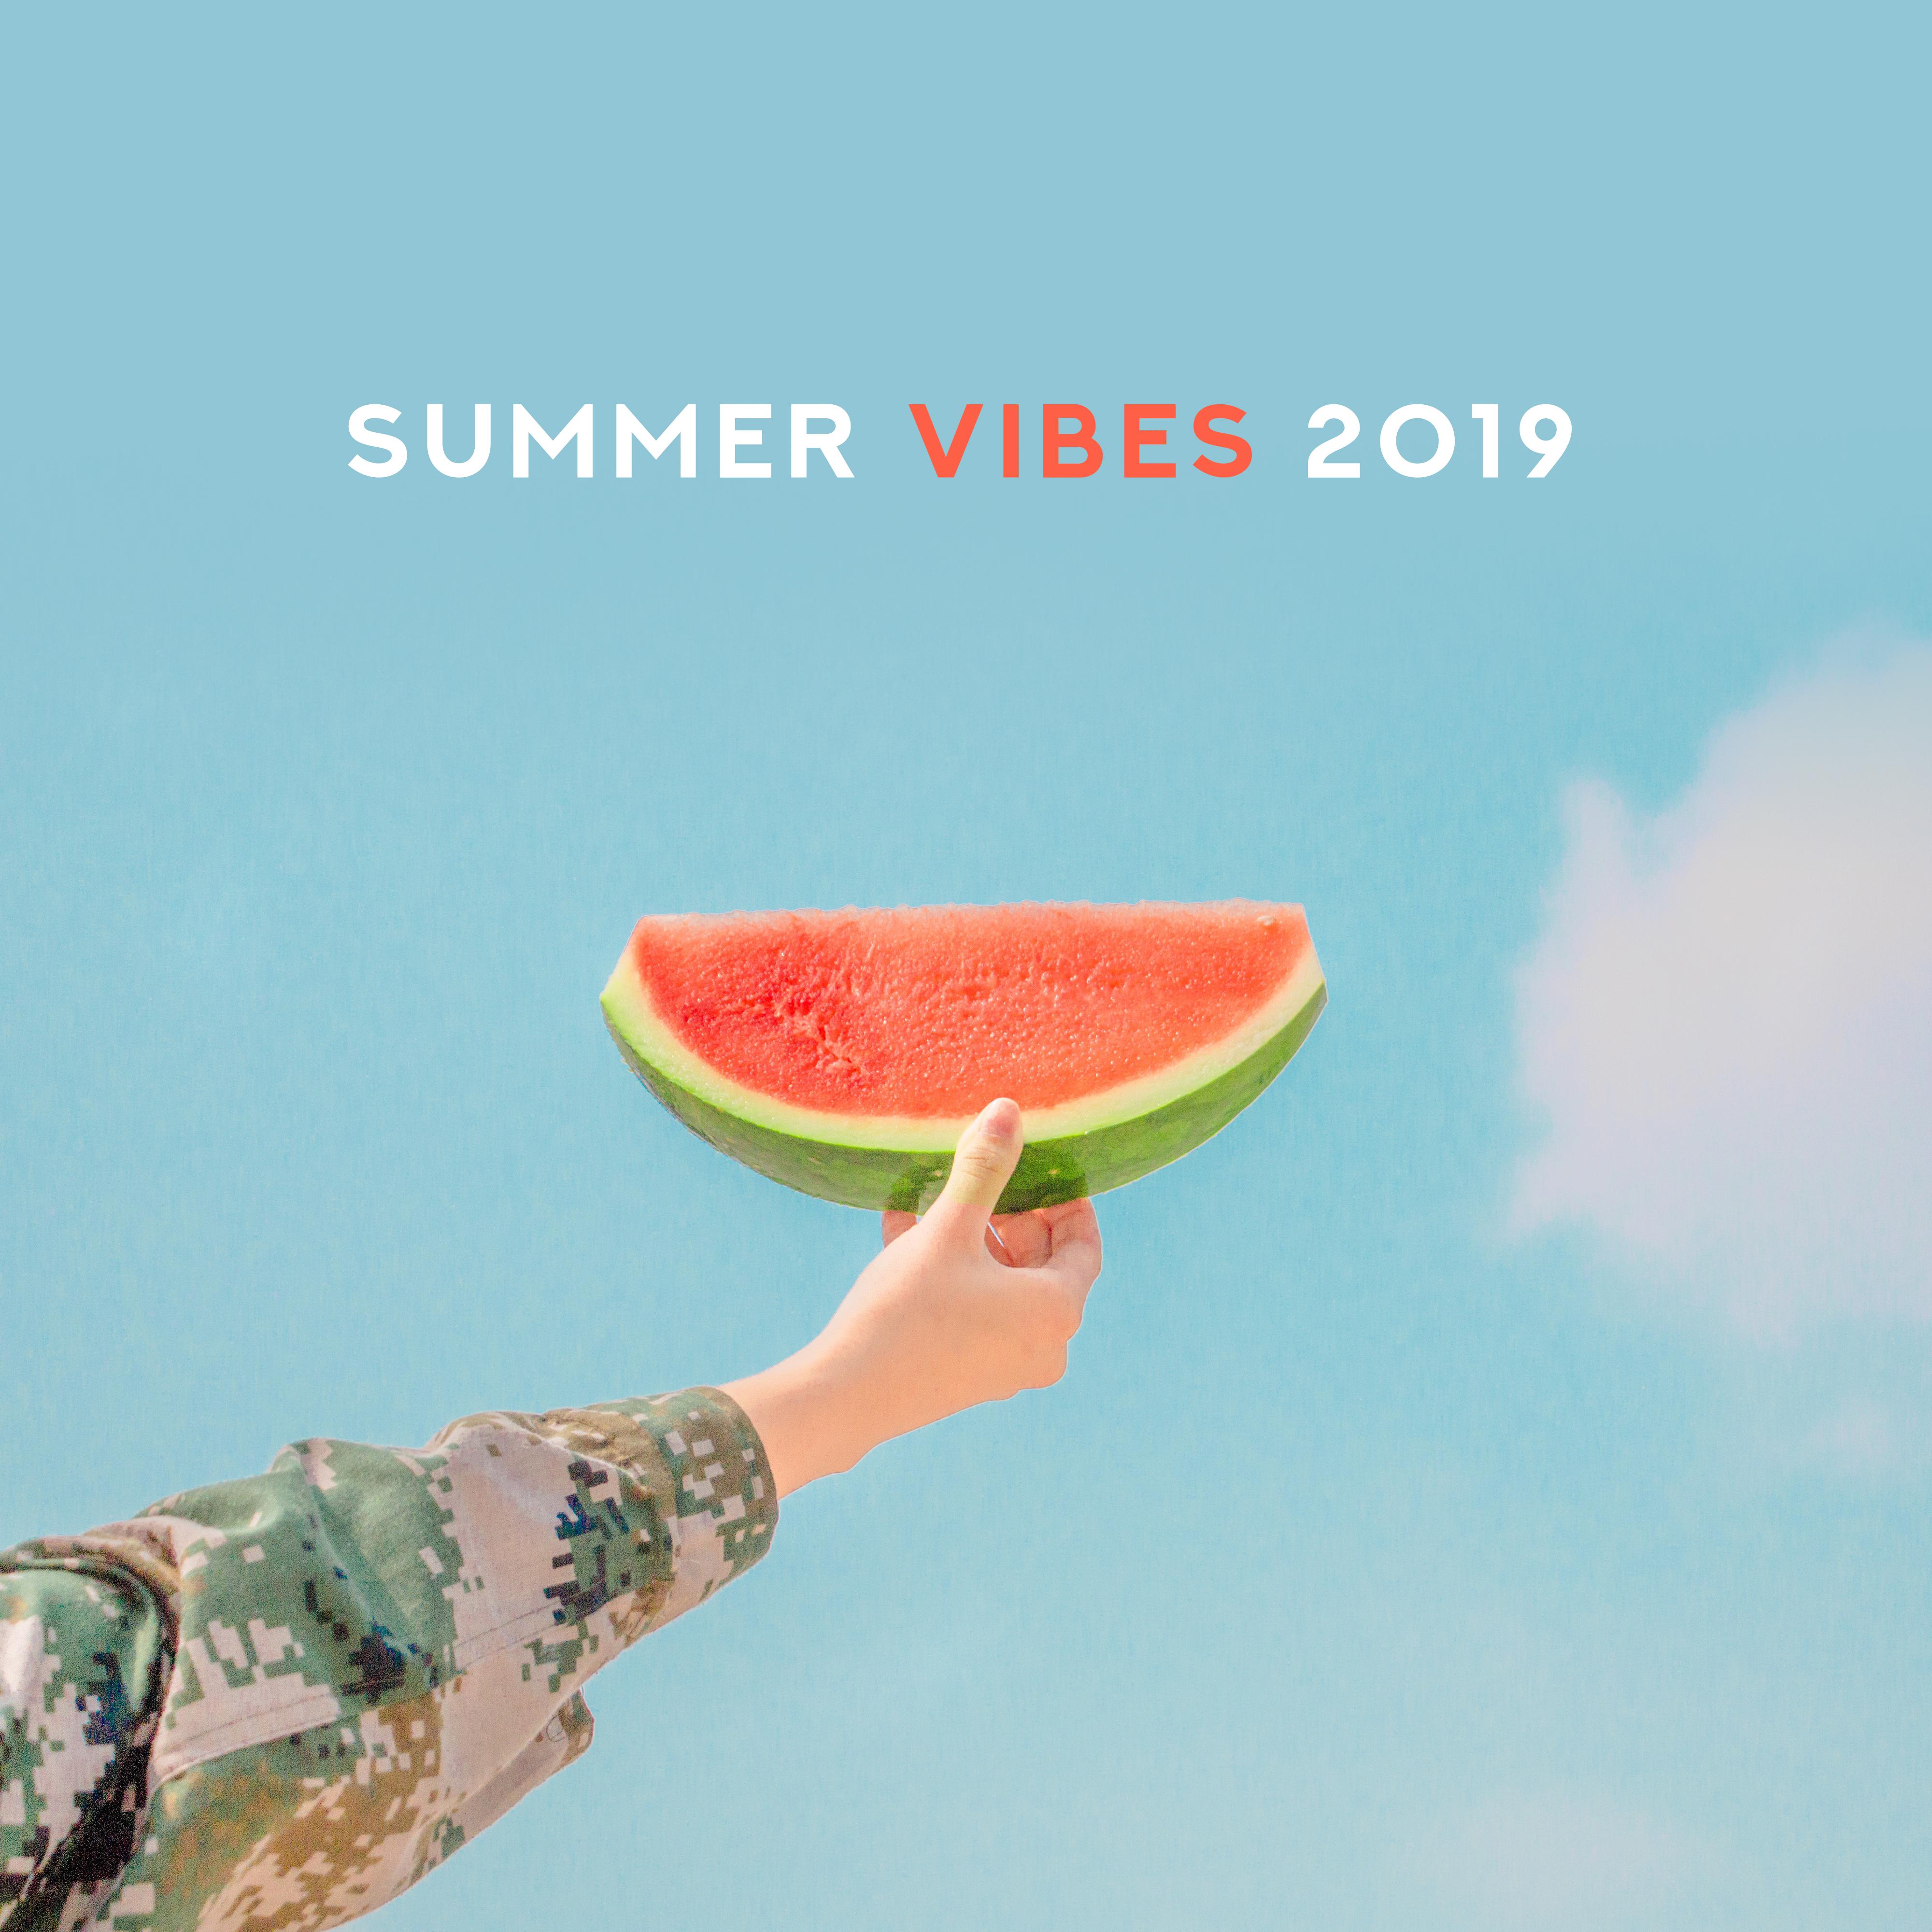 Summer Vibes 2019 – Ibiza Summertime, Stress Relief, Beach Melodies, Cafe Ibiza Moments, Summer Chill Out 2019